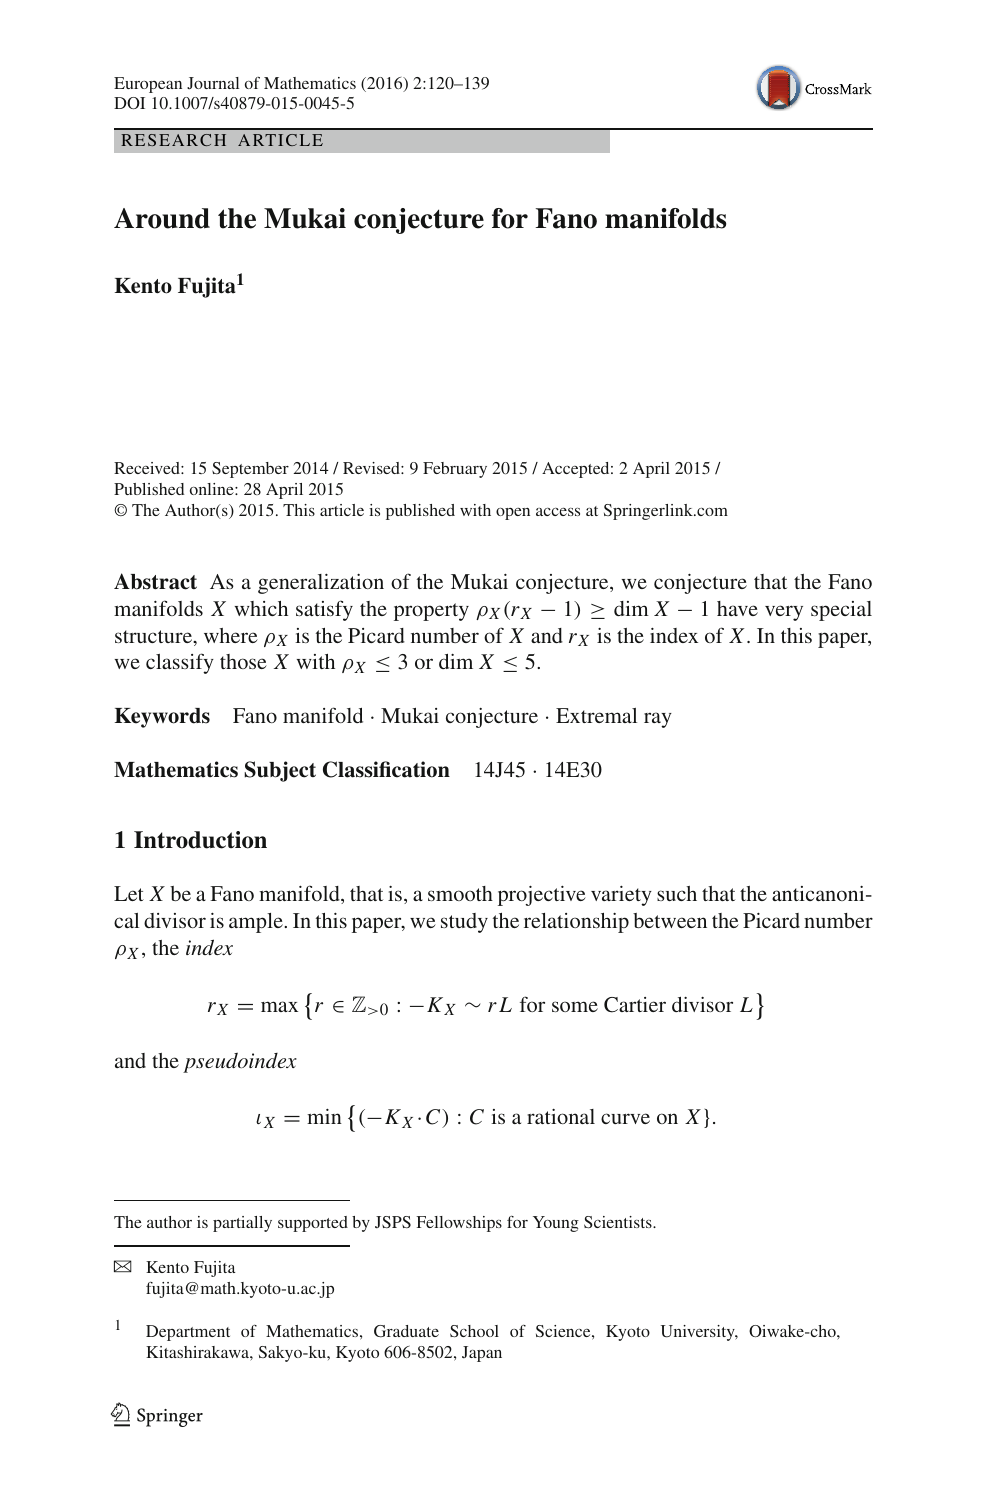 Around The Mukai Conjecture For Fano Manifolds Topic Of Research Paper In Mathematics Download Scholarly Article Pdf And Read For Free On Cyberleninka Open Science Hub